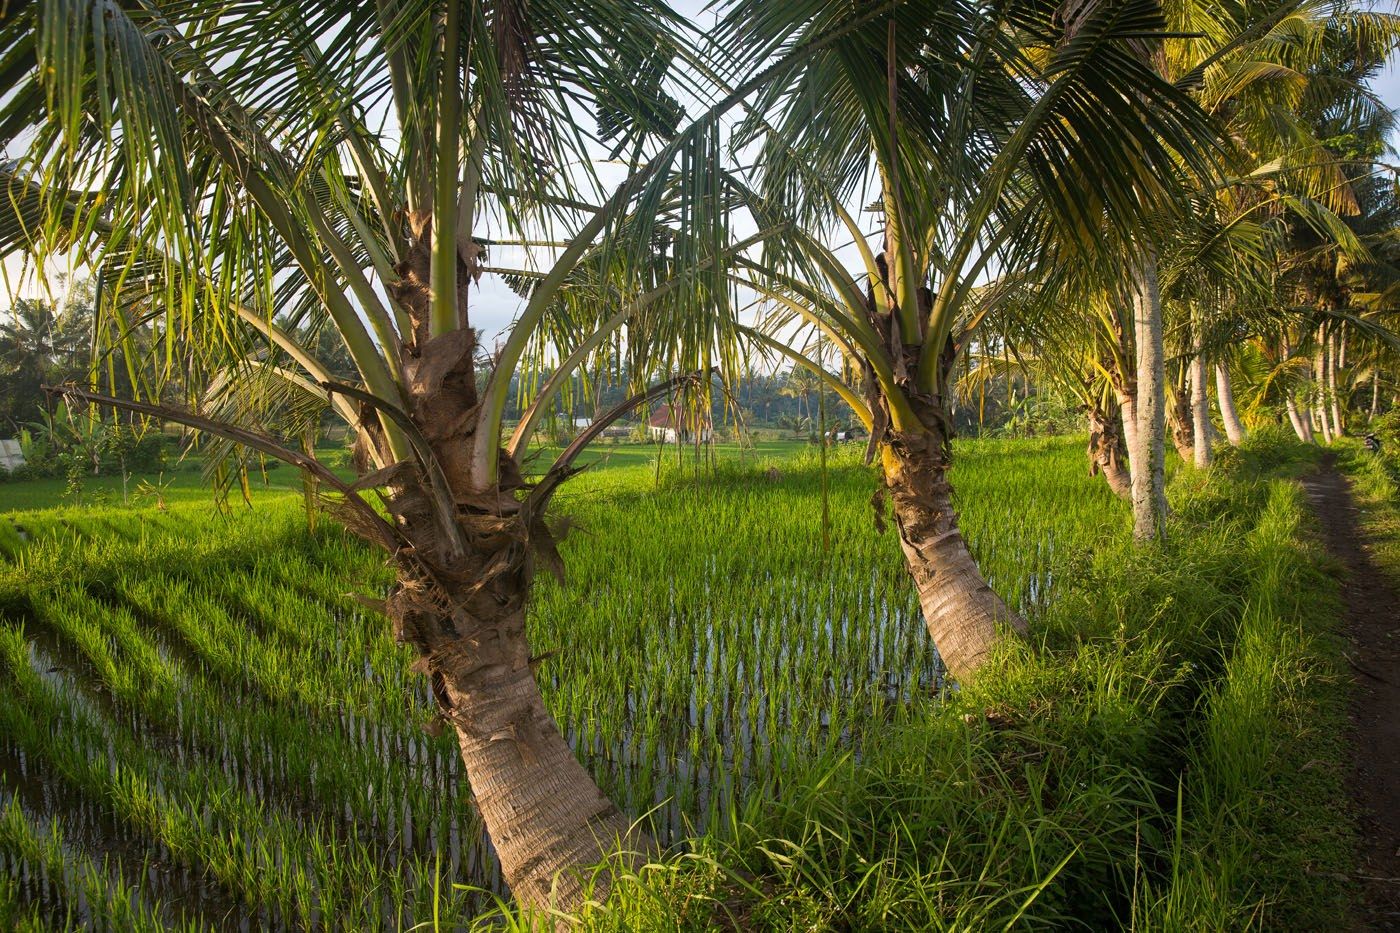 Rice fields and palm trees